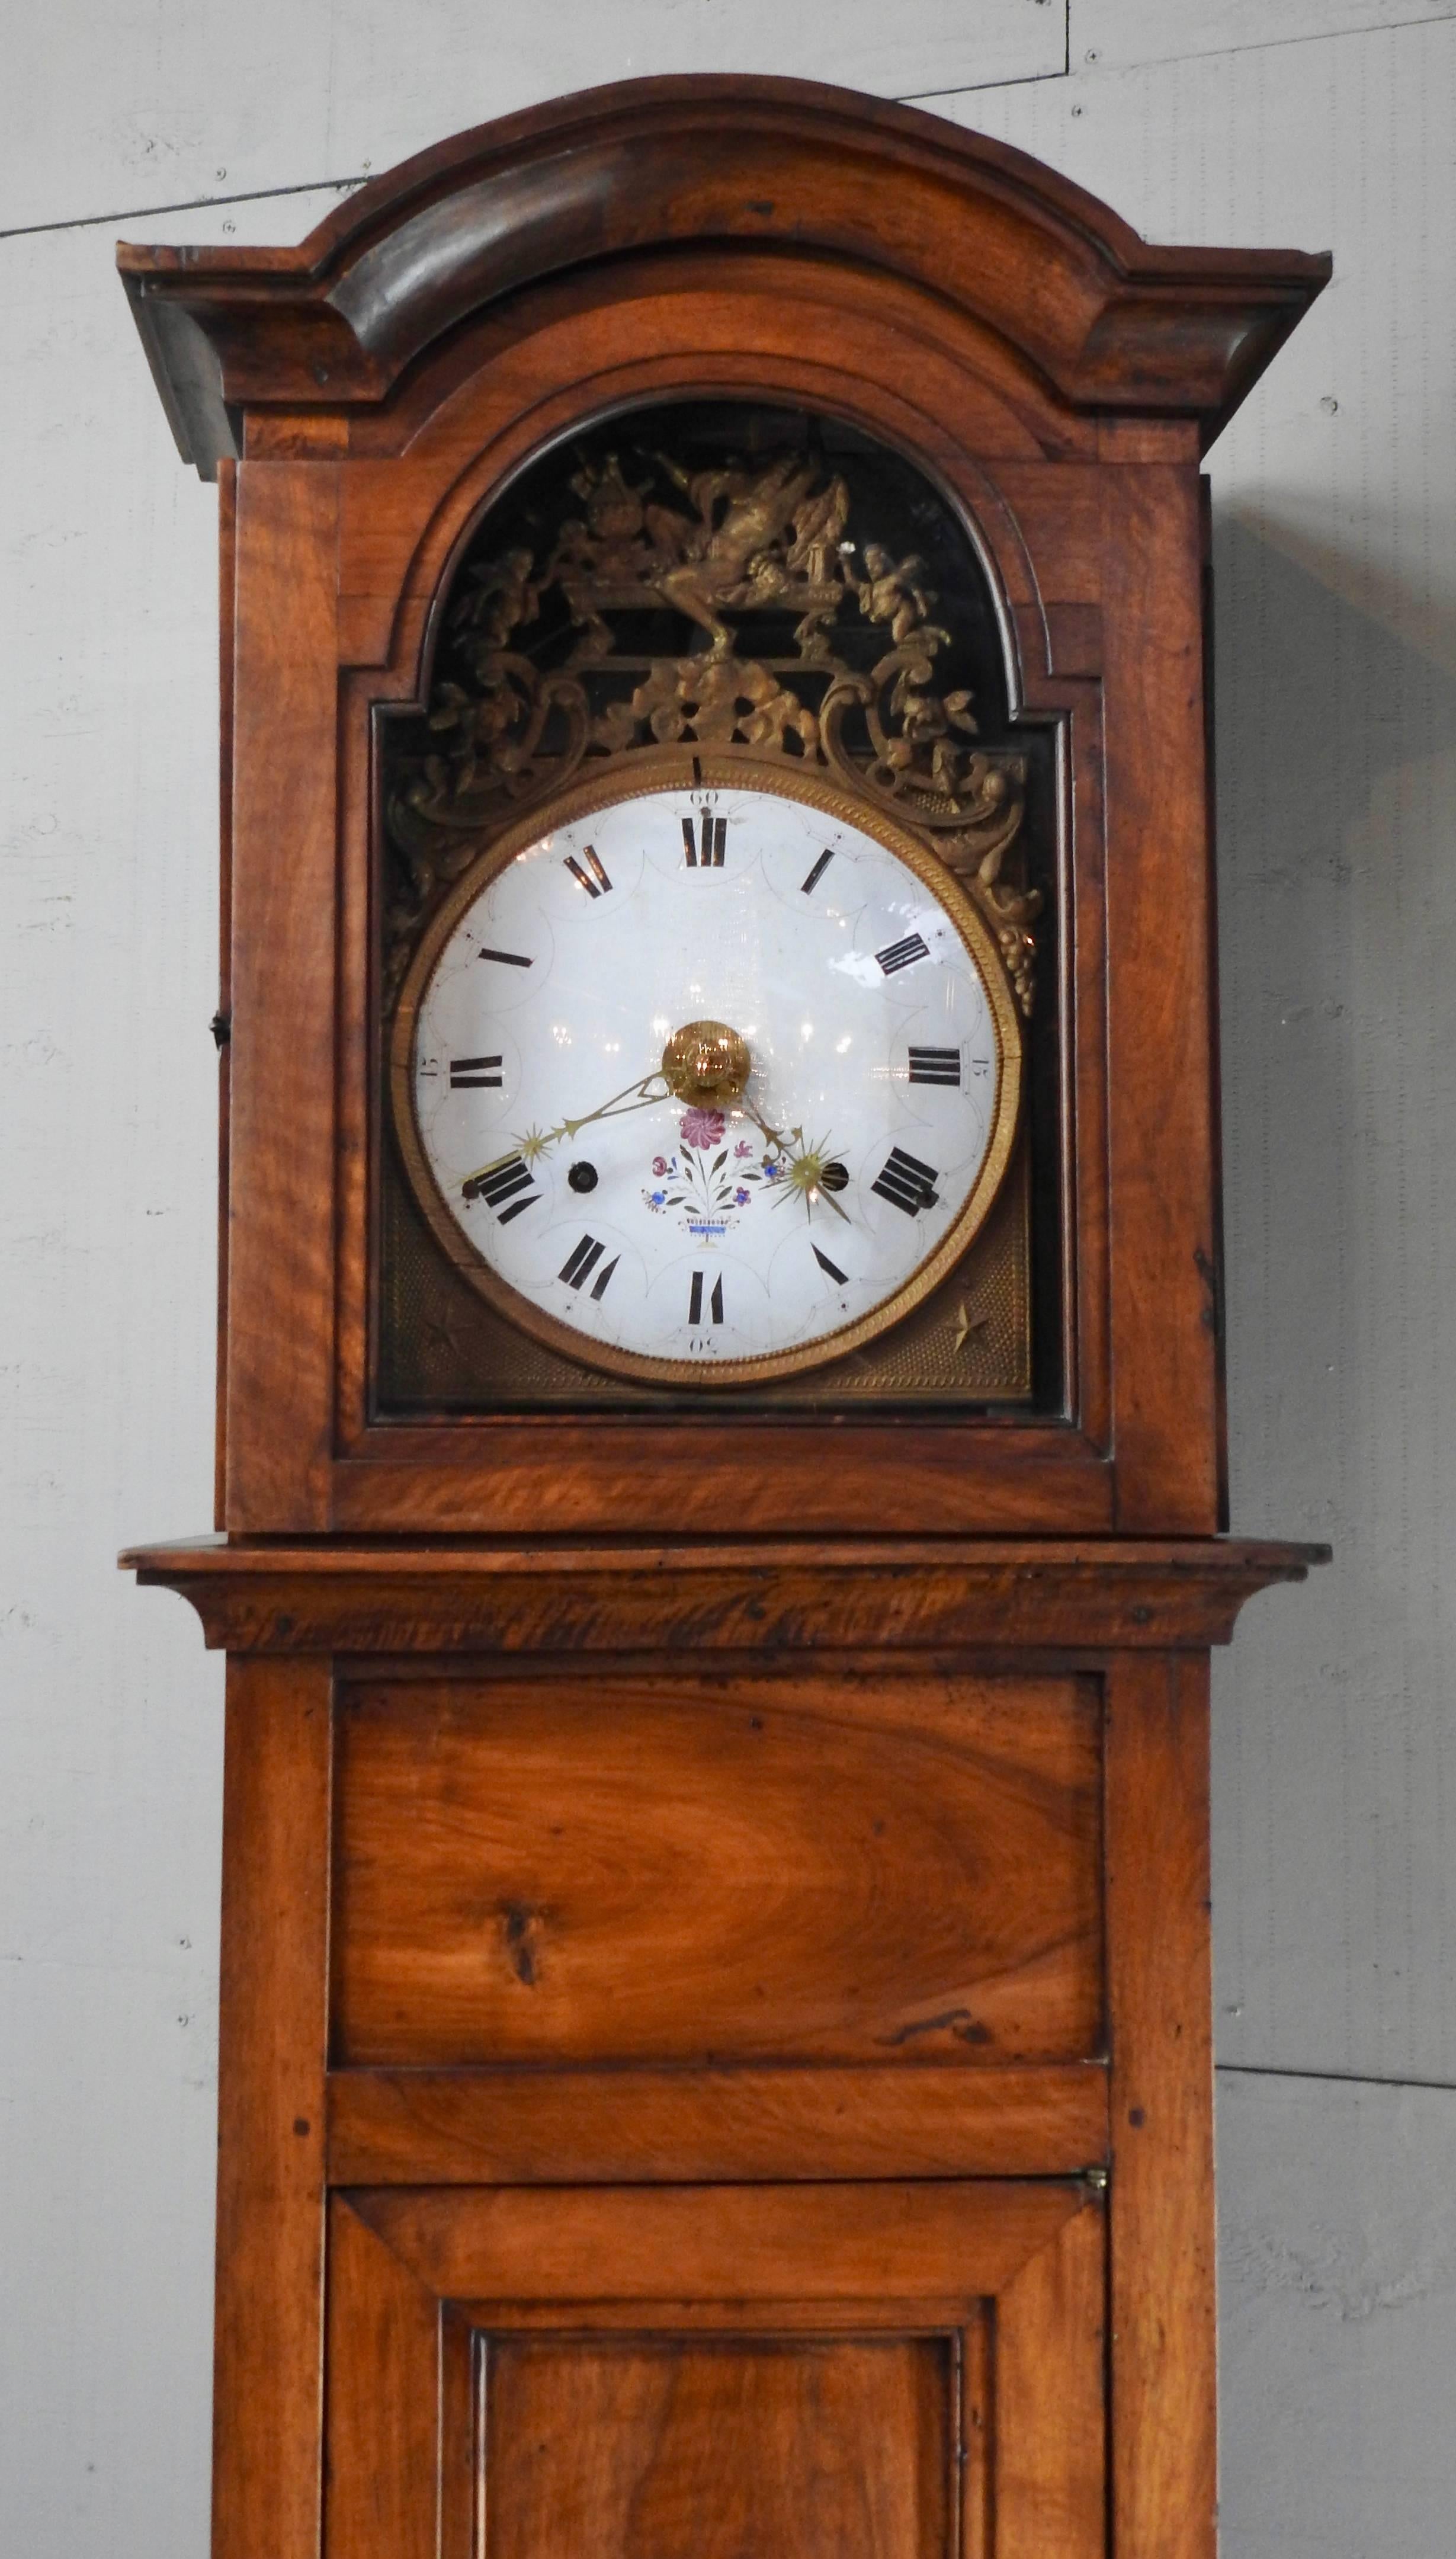 Cherrywood long case clock featuring hand-cut metal hands and Roman numerals. Dainty flowers add to its beauty. The bonnet has graceful curves and tops off a medley of dancing cherubs in gilt. There is a window in the door to view the bronze